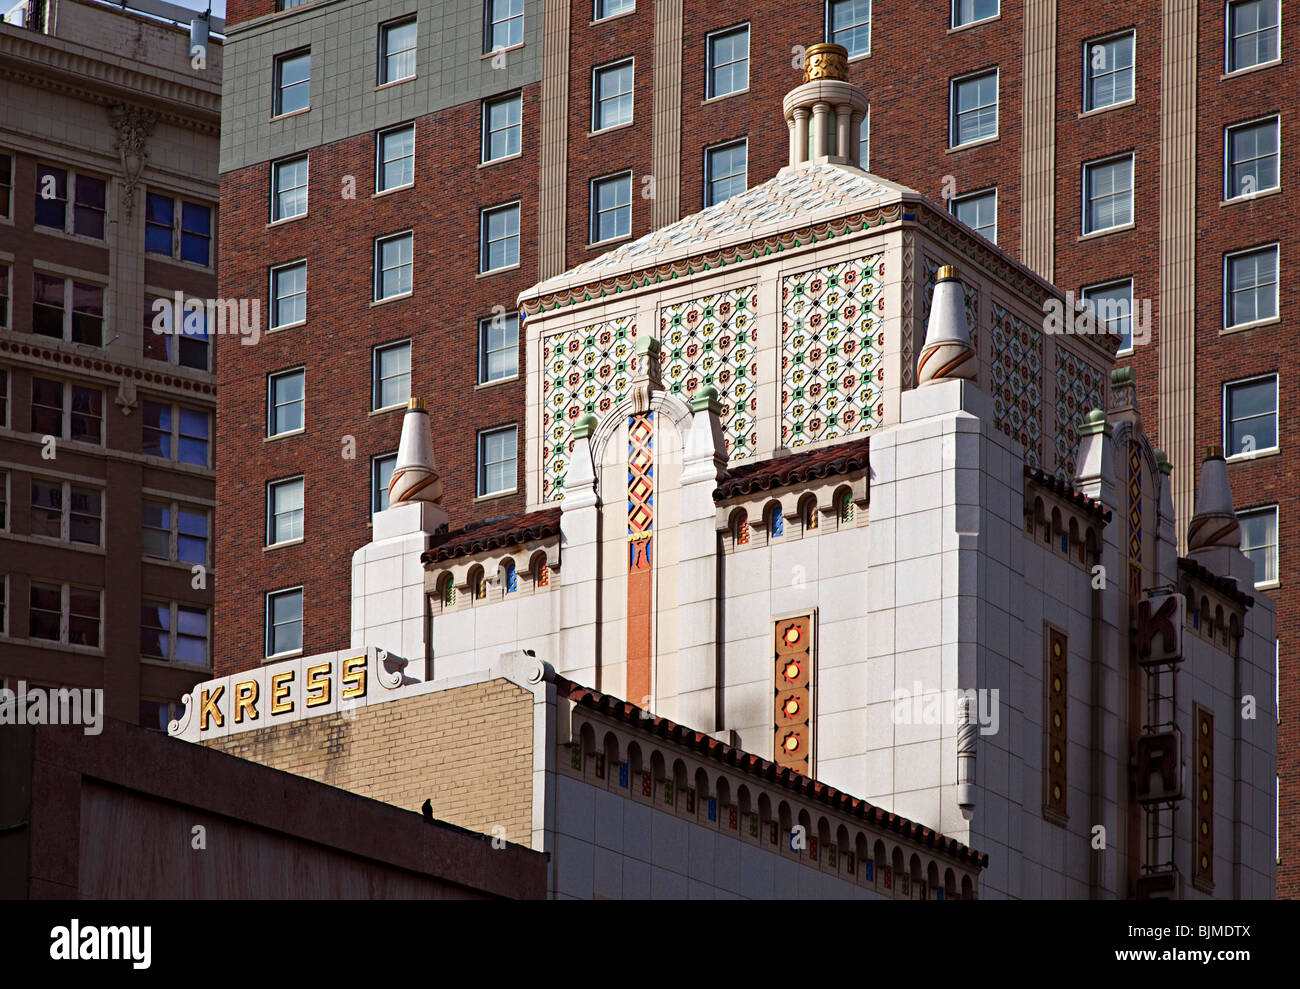 Classic architecture in the Kress building mixing old and new styles El Paso Texas USA Stock Photo